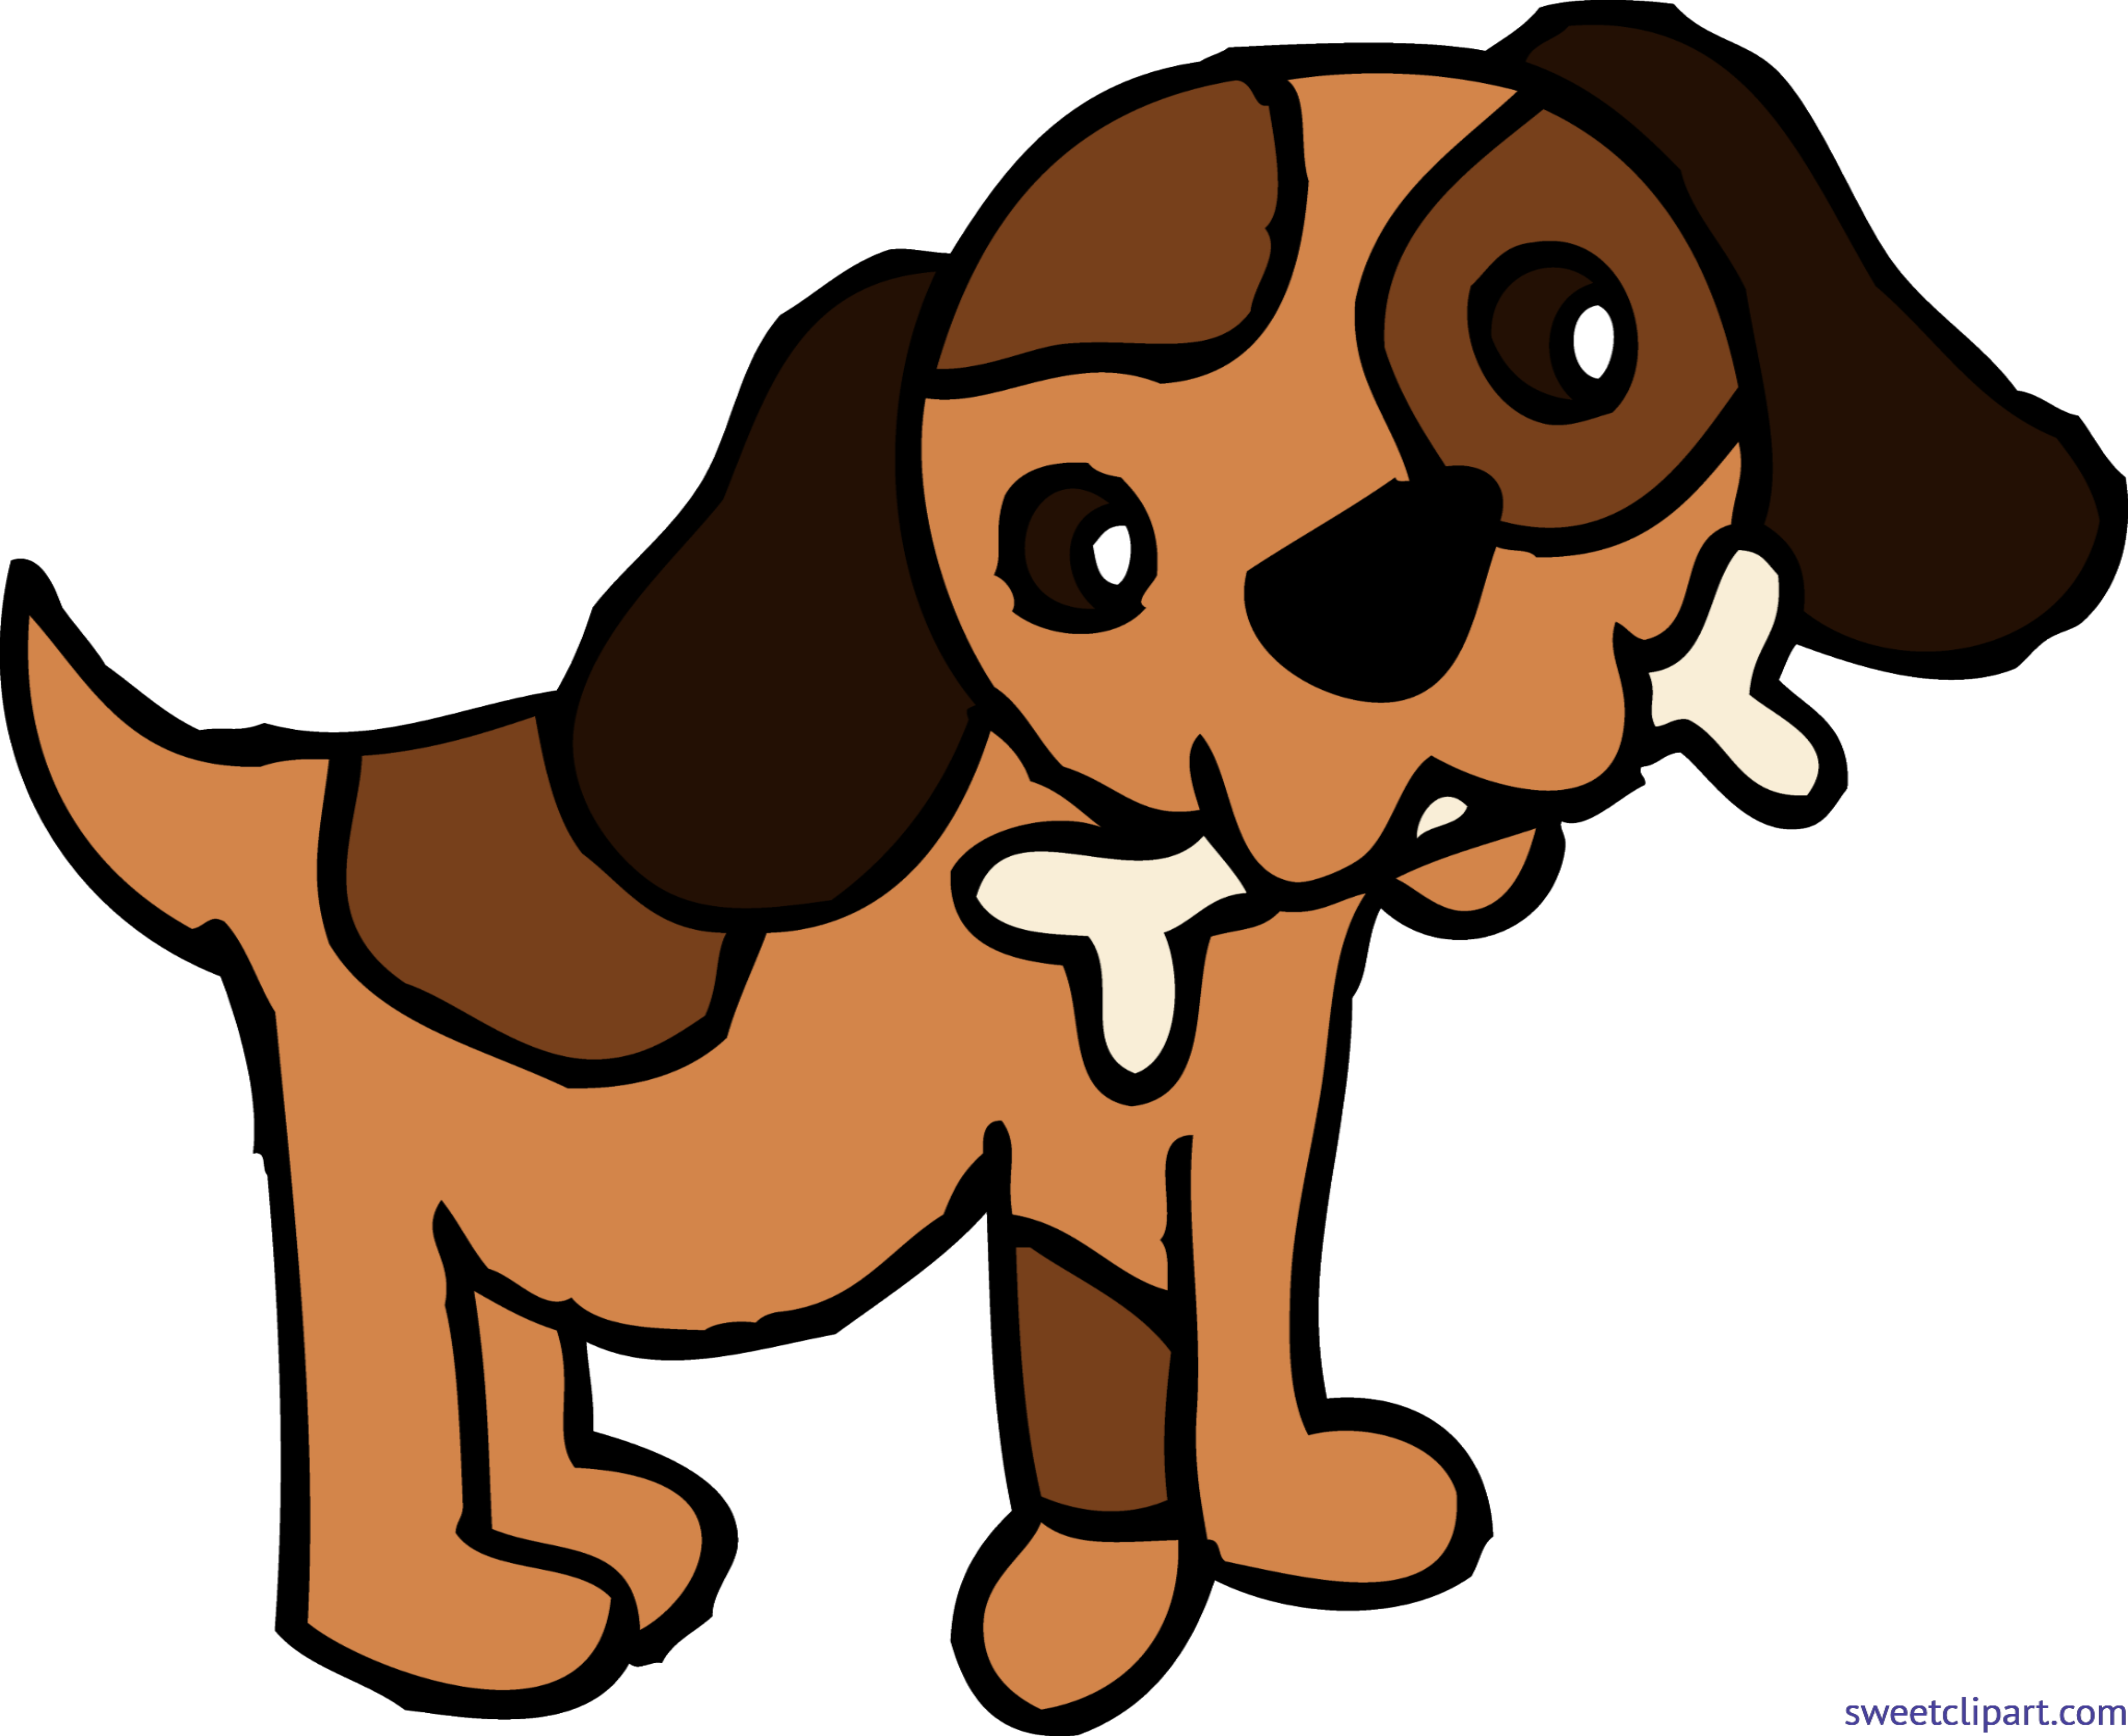 Puppy dog with bone. People clipart pet